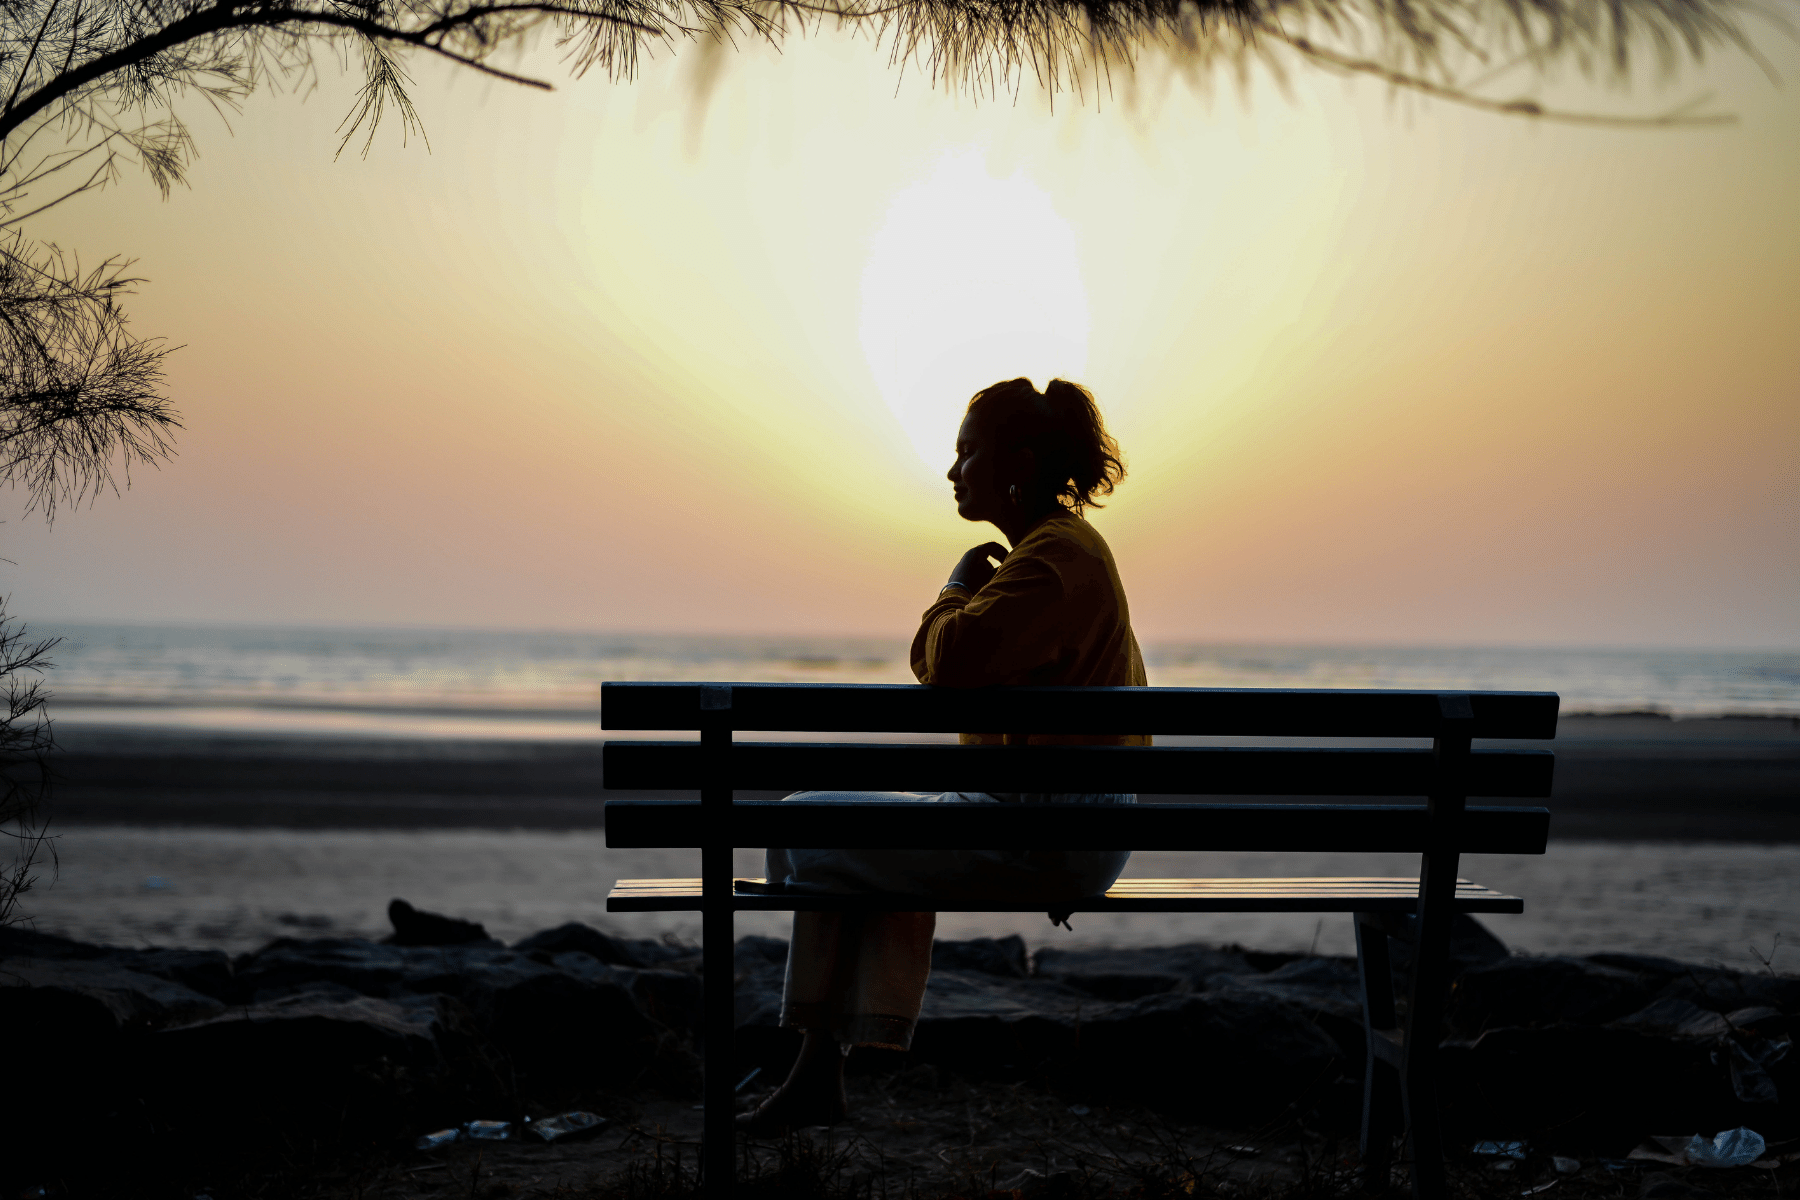 picture of the back of a person sitting on a bench looking out at water